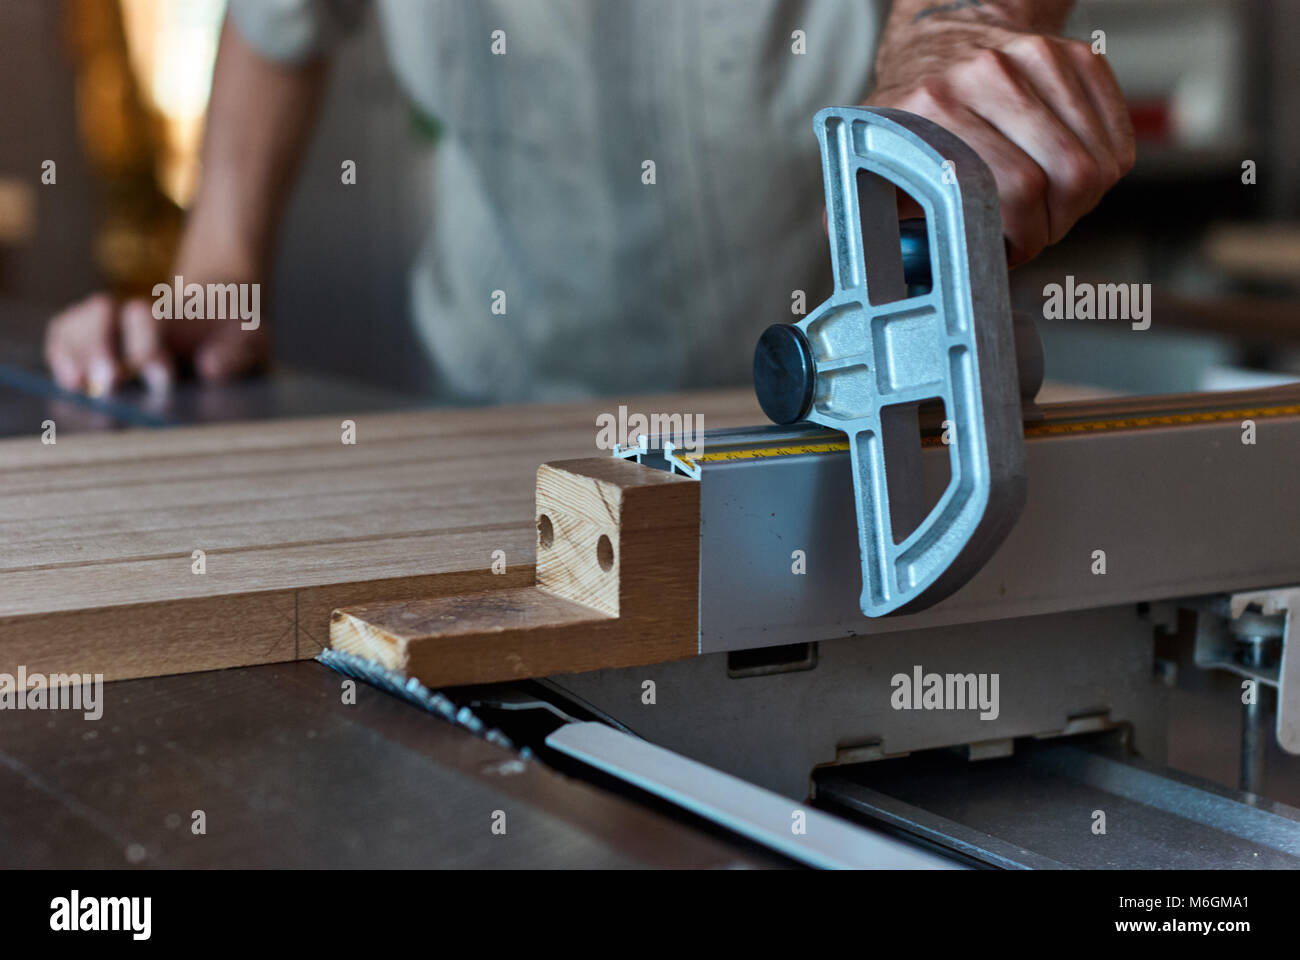 Unrecognizable carpenter using sharp table saw to cut wooden edge-glued panel while working in professional workshop Stock Photo